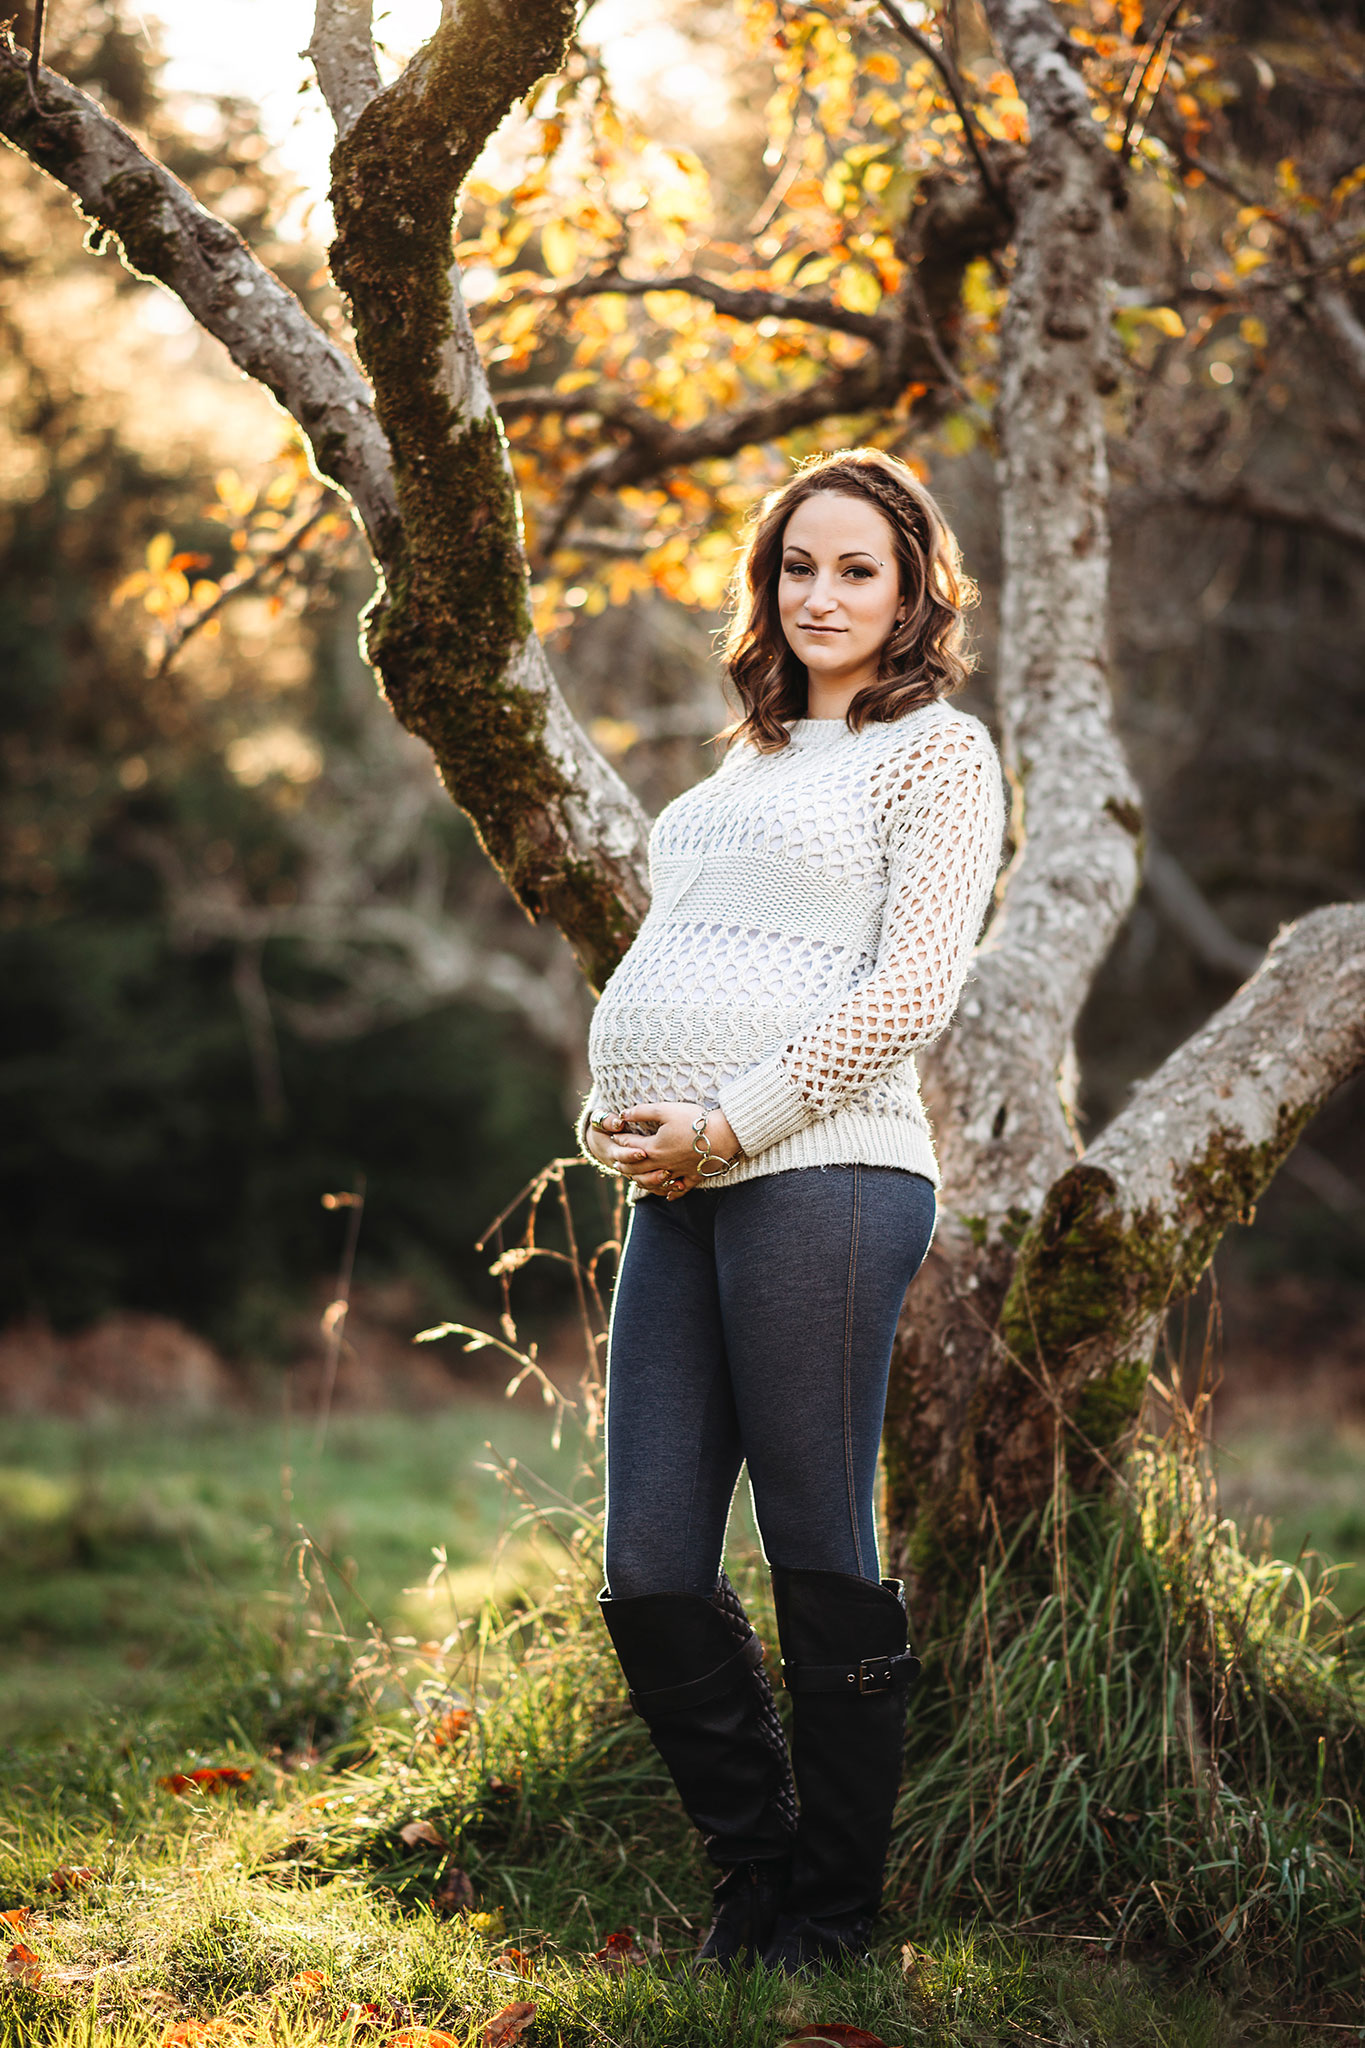 Fall maternity photography in a cozy sweater at sunset in East Sooke Park near Victoria.